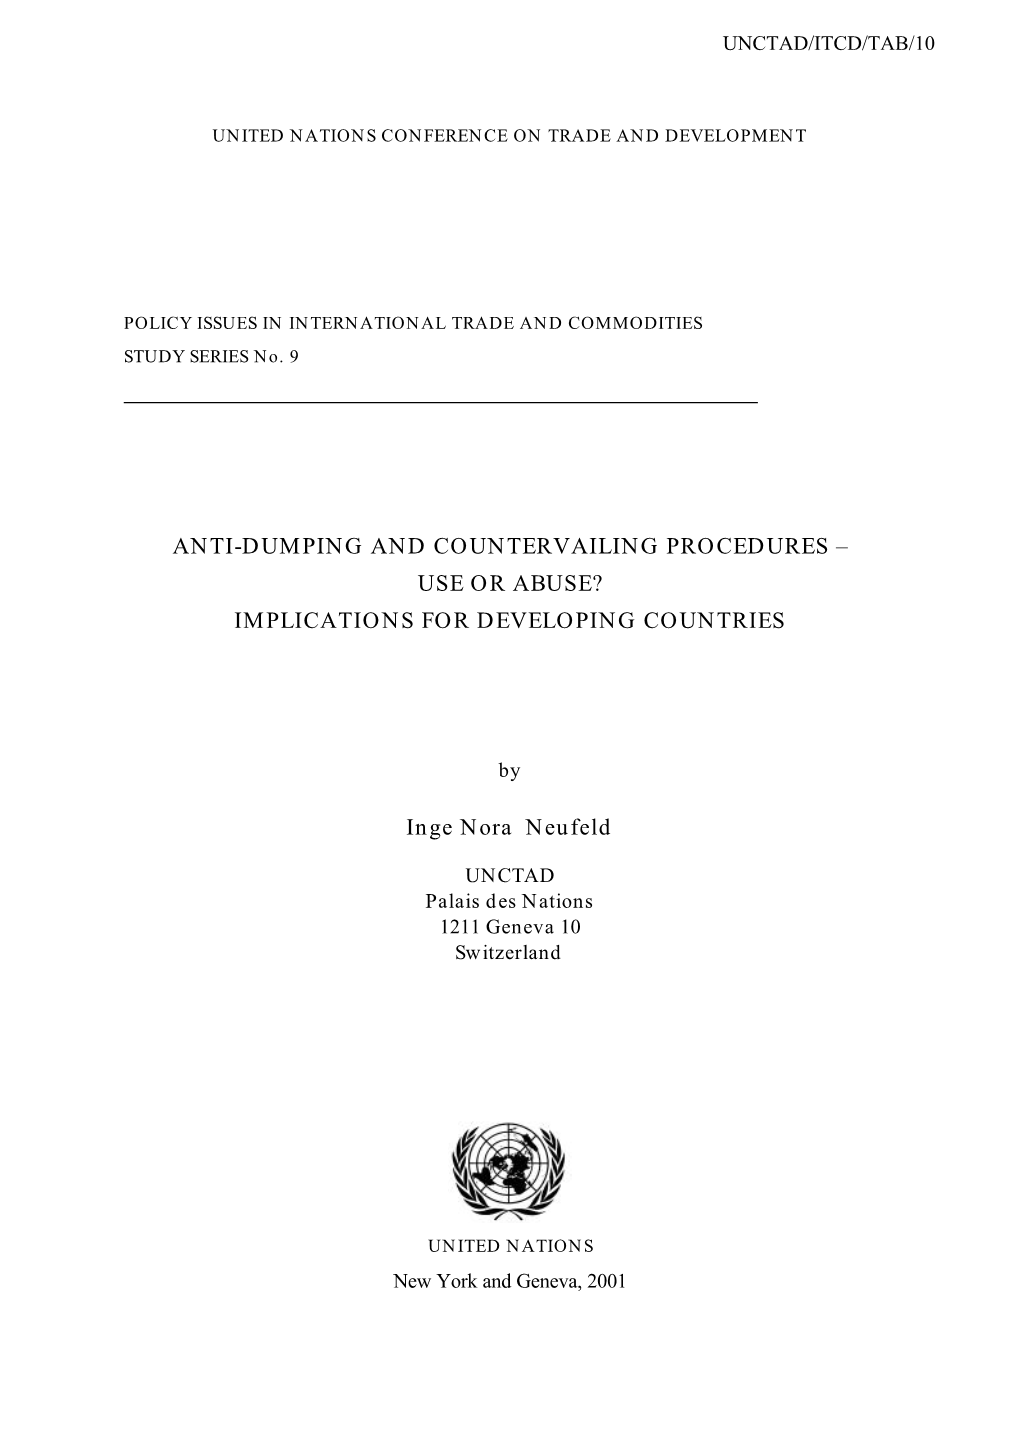 Anti-Dumping and Countervailing Procedures – Use Or Abuse? Implications for Developing Countries